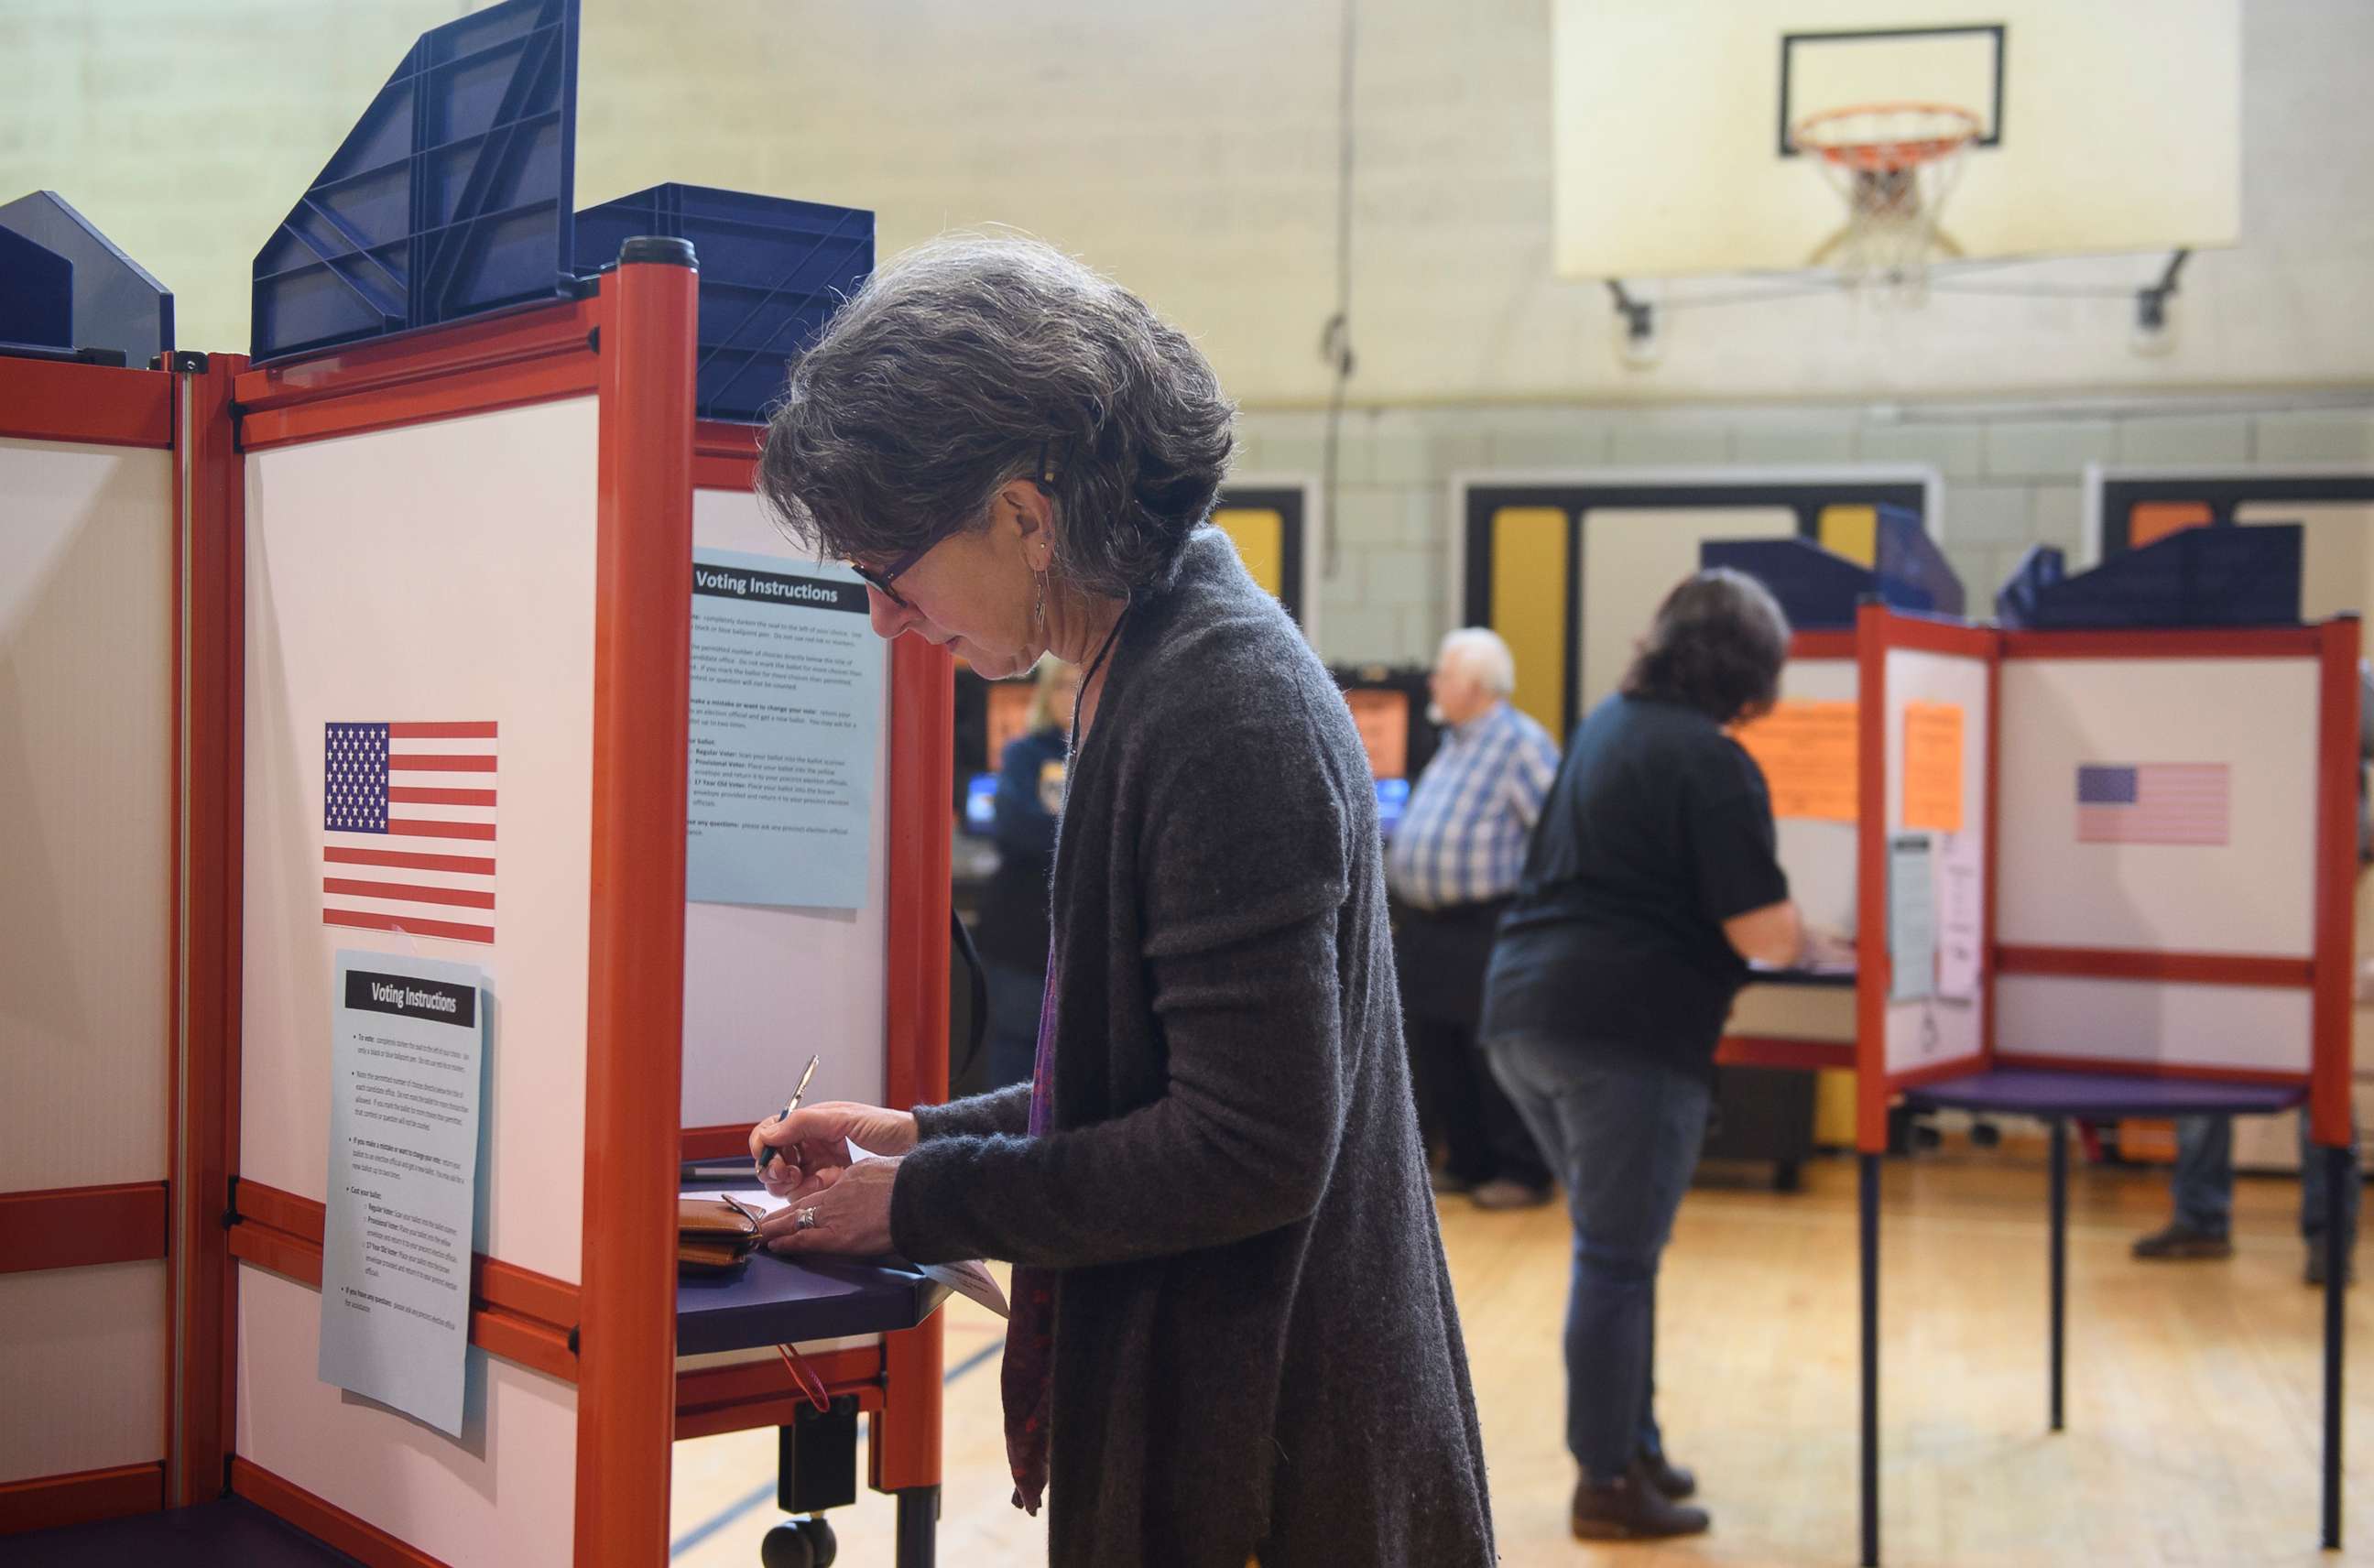 PHOTO: In this May 3, 2022, file photo, a voter fills in her ballot during primary voting at Central Elementary School in Kent, Ohio.